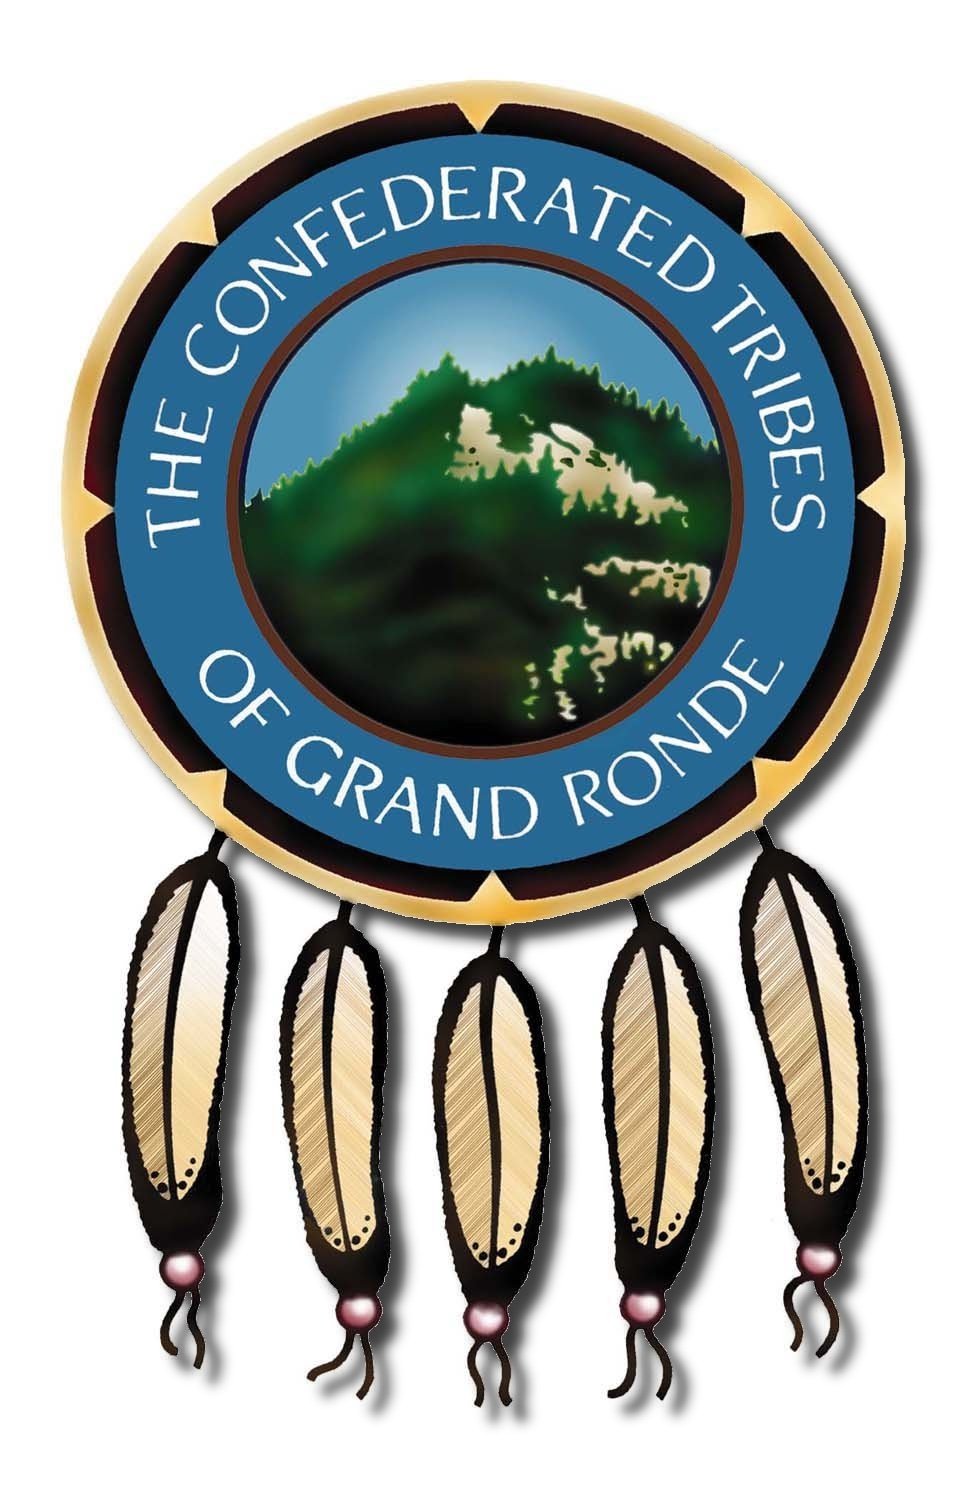 Confederated Tribes of Grand Ronde.jpg